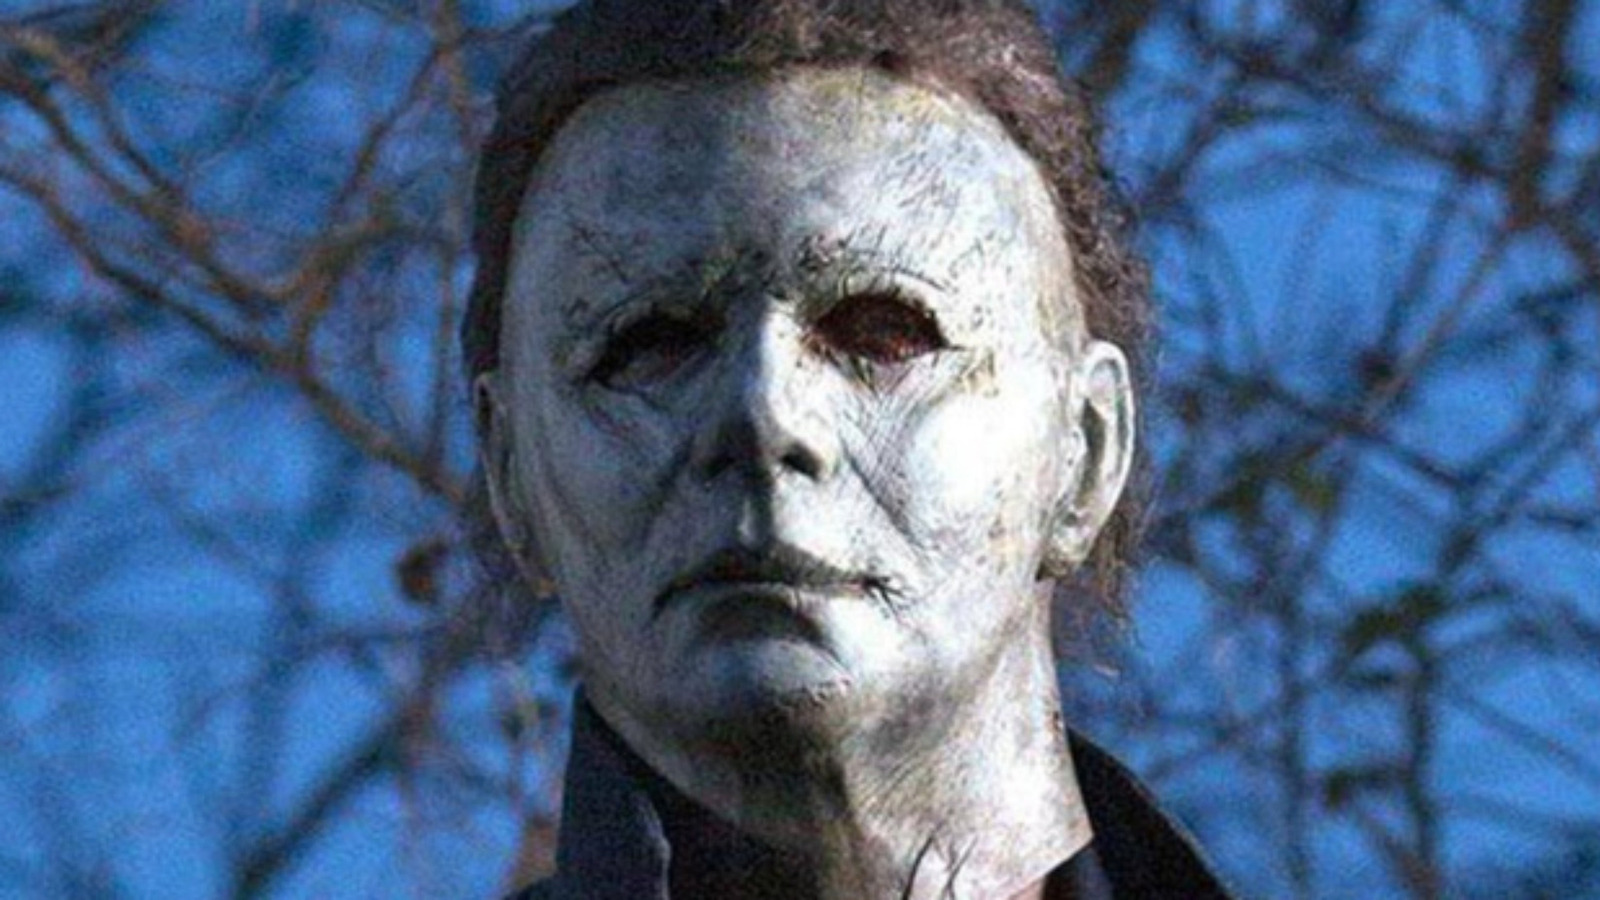 What Michael Myers Really Looks Like Underneath The Mask